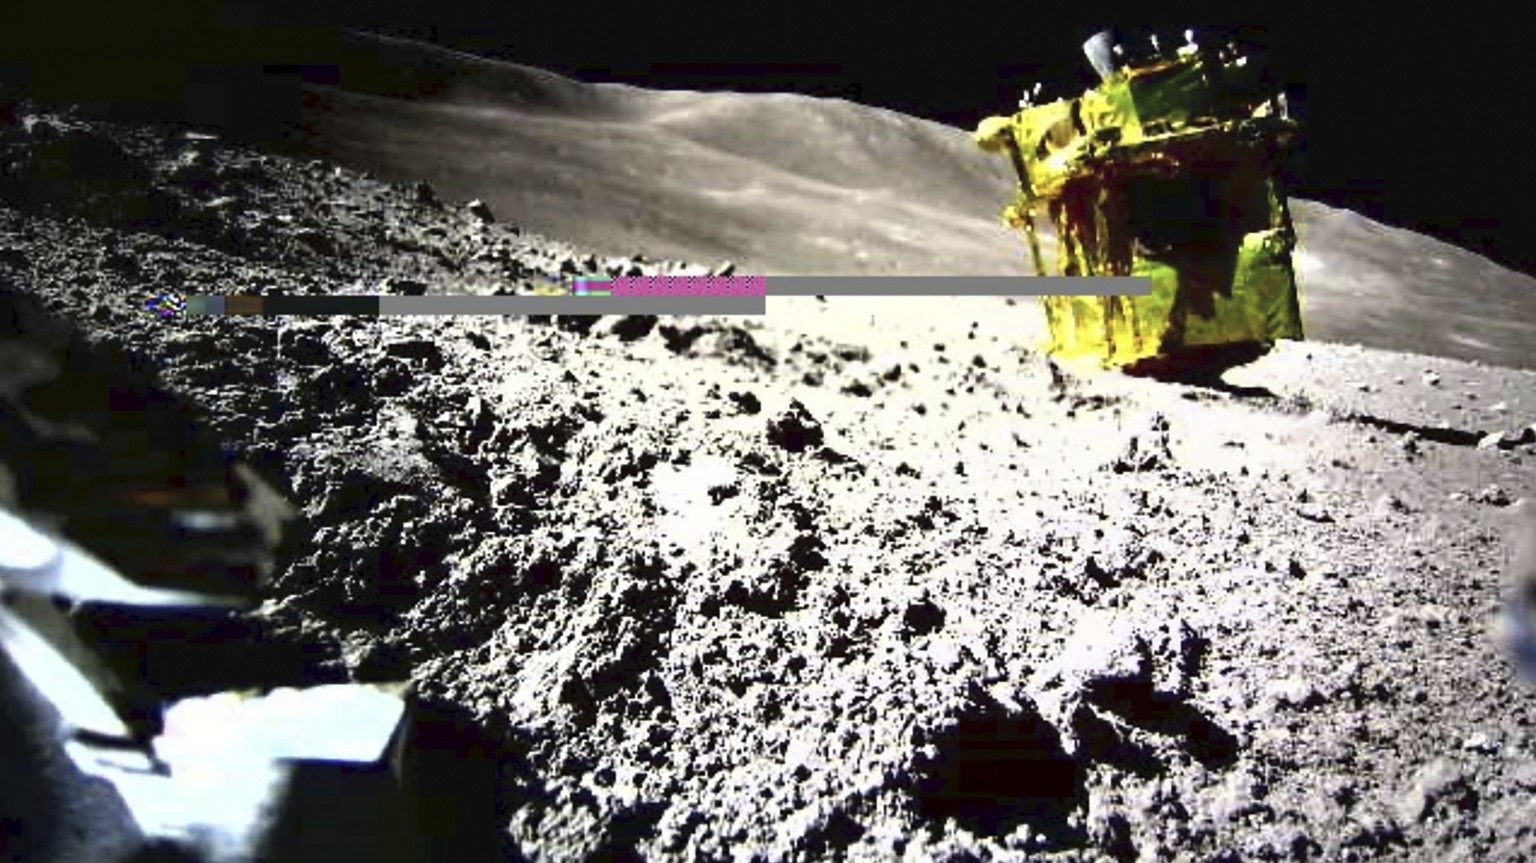 FILE - This image provided by the Japan Aerospace Exploration Agency (JAXA)/Takara Tomy/Sony Group Corporation/Doshisha University shows an image taken by a Lunar Excursion Vehicle 2 (LEV-2) of a robo ...